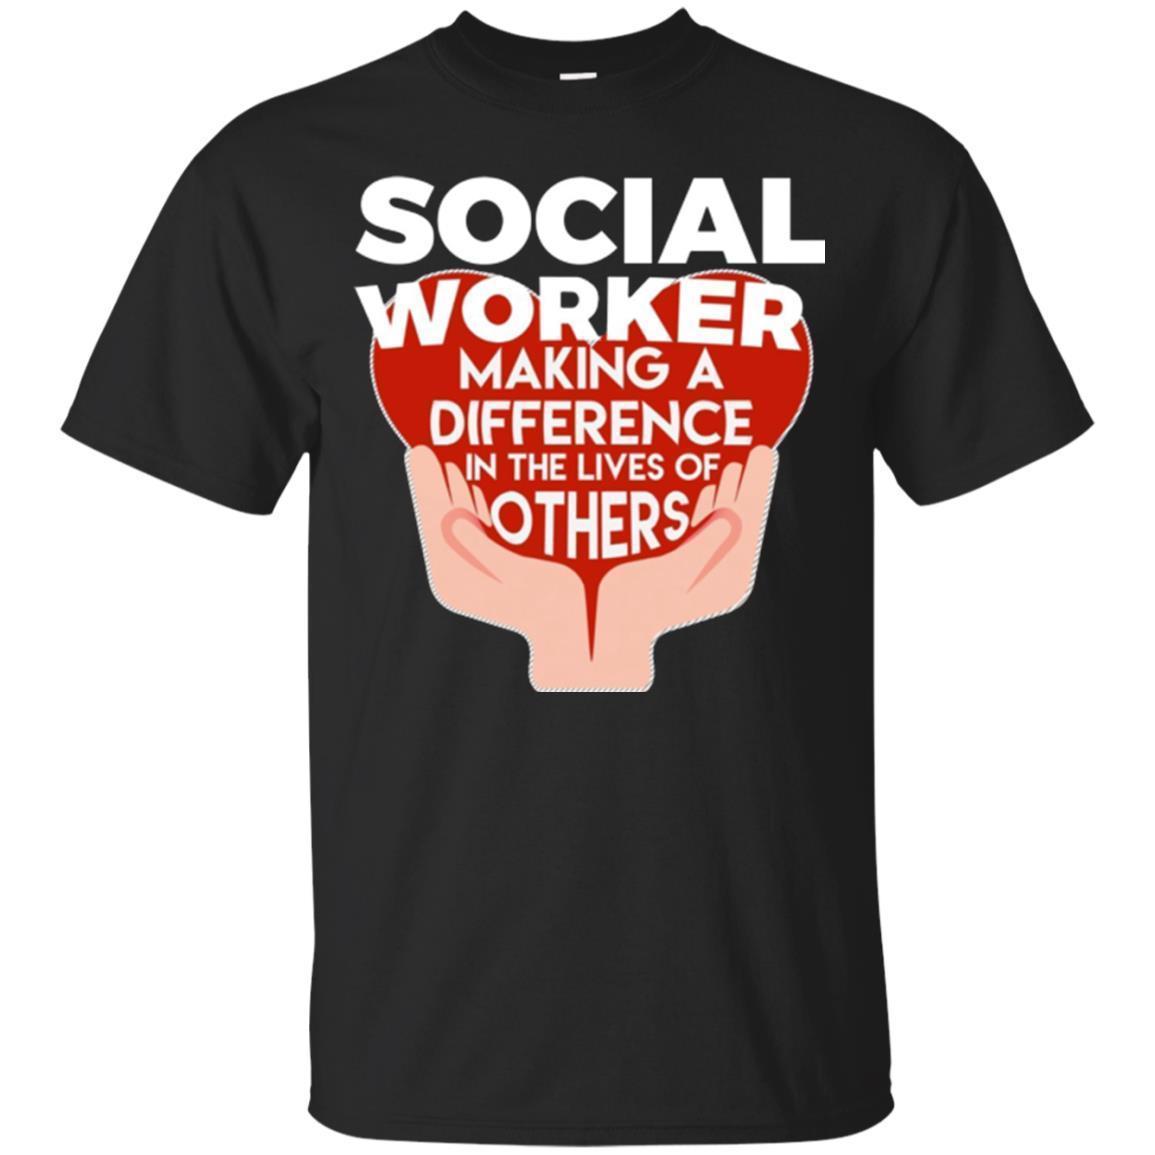 Social Worker Making A Difference Lives Of Others T-shirt T-shirt - Amyna